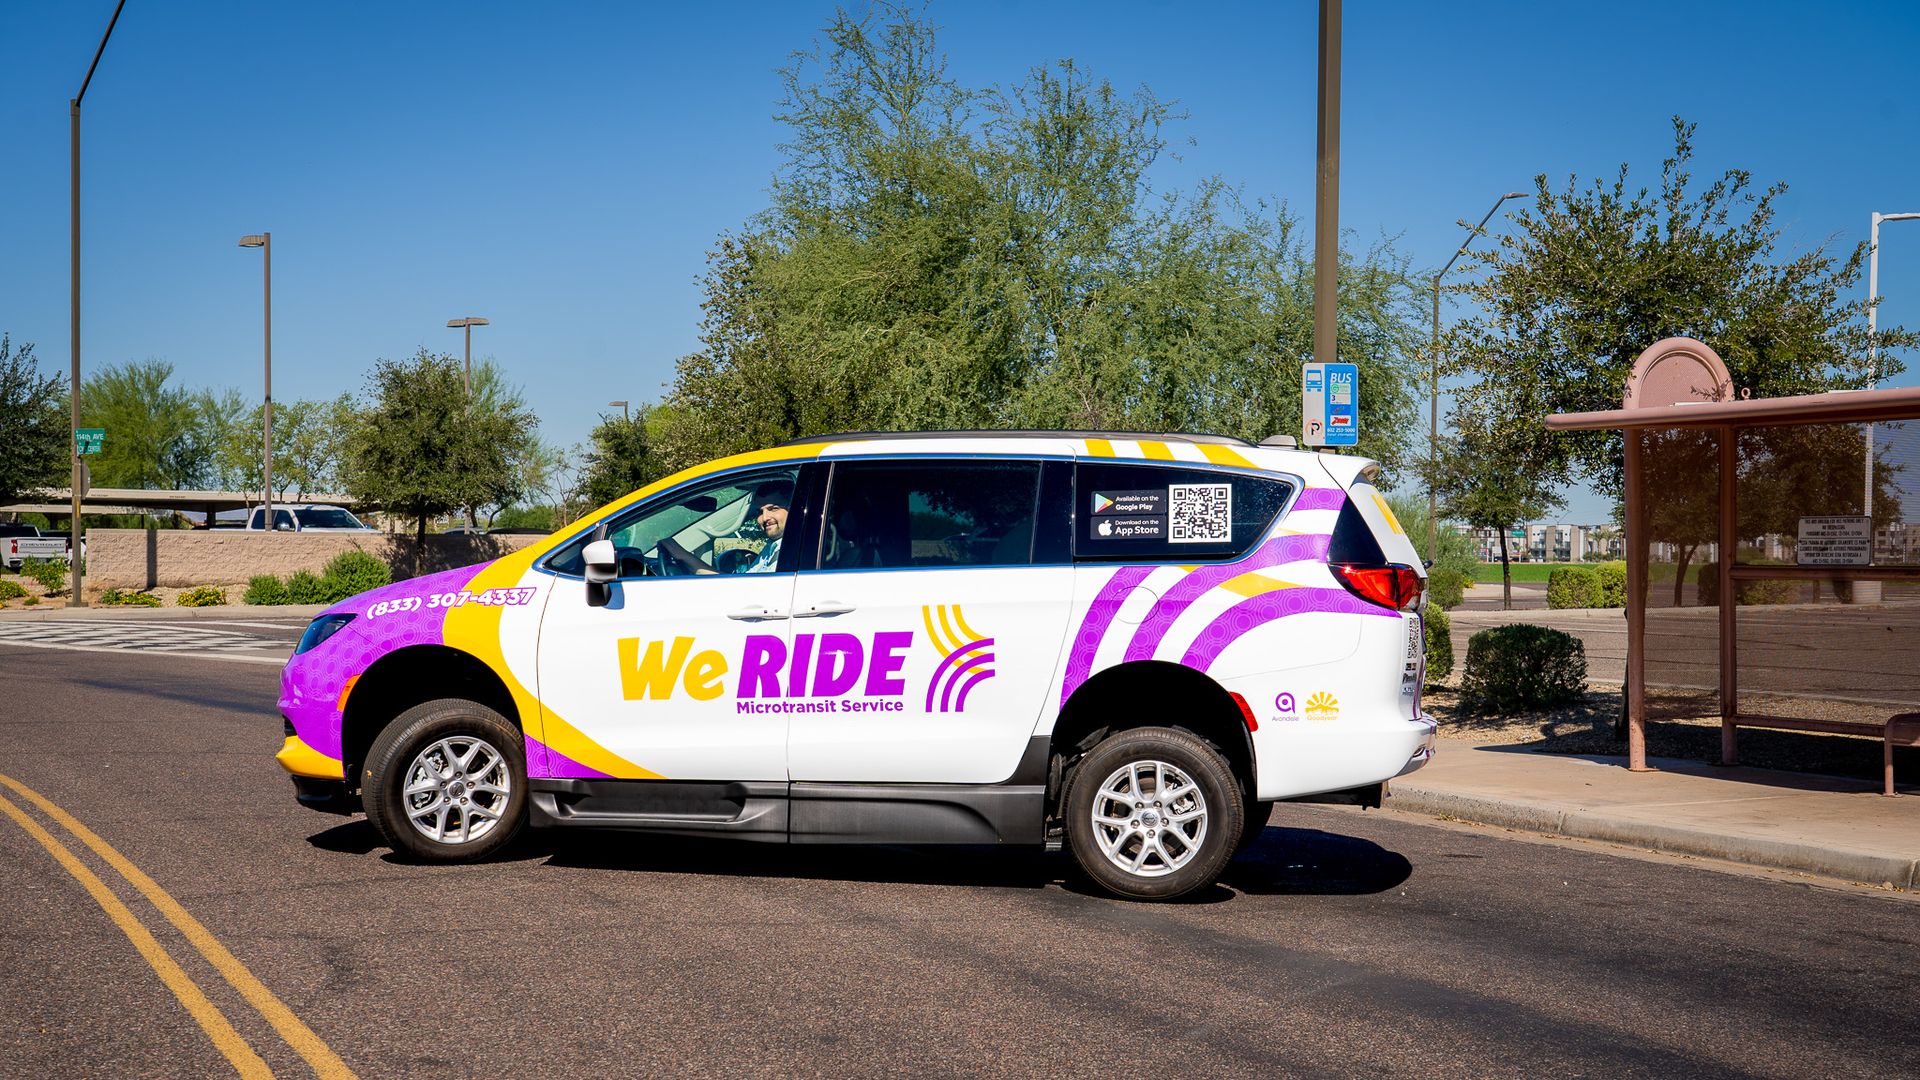 A white minivan with purple and yellow markings and the words We Ride on the side.